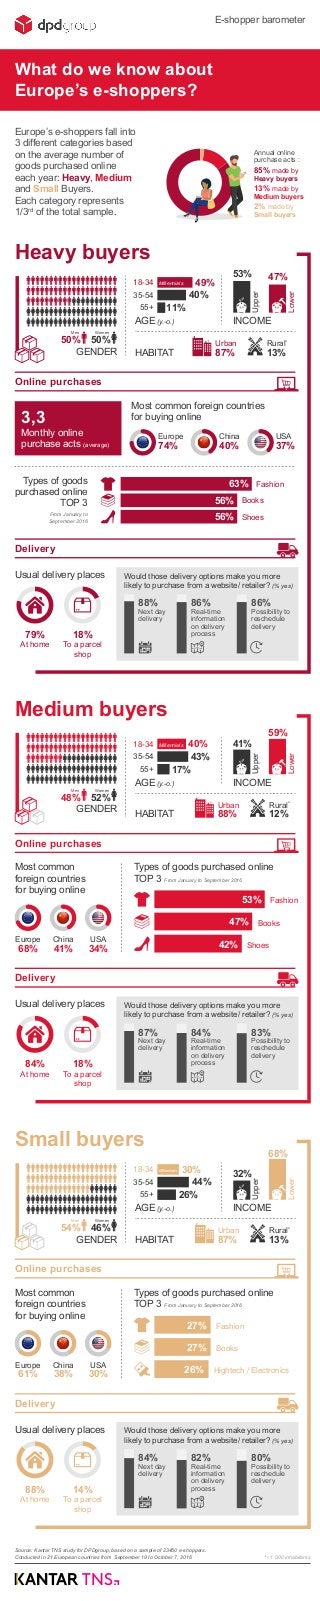 Heavy buyers
Types of goods
purchased online
TOP 3
From January to
September 2016
Monthly online
purchase acts (average)
Most common foreign countries
for buying online
What do we know about
Europe’s e-shoppers?
E-shopper barometer
Europe
74%
China
40%
USA
37%
GENDER
AGE (y.-o.)
HABITAT
INCOME
Rural*
13%
Urban
87%
Upper
Lower
53% 47%
3,3
Online purchases
Online purchases
Delivery
63%
56%
56%
Fashion
Books
Shoes
Hightech / Electronics
Source: Kantar TNS study for DPDgroup, based on a sample of 23450 e-shoppers.
Conducted in 21 European countries from September 19 to October 7, 2016
Europe’s e-shoppers fall into
3 different categories based
on the average number of
goods purchased online
each year: Heavy, Medium
and Small Buyers.
Each category represents
1/3rd
of the total sample.
Usual delivery places
79%
At home
18%
To a parcel
shop
Would those delivery options make you more
likely to purchase from a website/ retailer? (% yes)
88%
Next day
delivery
86%
Possibility to
reschedule
delivery
86%
Real-time
information
on delivery
process
49%
40%
11%
18-34
35-54
55+
Millennials
Medium buyers
Types of goods purchased online
TOP 3 From January to September 2016
Most common
foreign countries
for buying online
Europe
68%
China
41%
USA
34%
AGE (y.-o.)
HABITAT
INCOME
Rural*
12%
Urban
88%
Upper
Lower
41%
59%
53%
47%
42%
Fashion
Books
Shoes
40%
43%
17%
18-34
35-54
55+
Millennials
Delivery
Usual delivery places
84%
At home
18%
To a parcel
shop
Would those delivery options make you more
likely to purchase from a website/ retailer? (% yes)
87%
Next day
delivery
83%
Possibility to
reschedule
delivery
84%
Real-time
information
on delivery
process
Annual online
purchase acts :
85% made by
Heavy buyers
13% made by
Medium buyers
2% made by
Small buyers
Online purchases
Small buyers
Types of goods purchased online
TOP 3 From January to September 2016
Most common
foreign countries
for buying online
Europe
61%
China
38%
USA
30%
AGE (y.-o.)
HABITAT
INCOME
Rural*
13%
Urban
87%
* < 1 000 inhabitants
Upper
Lower
32%
68%
27%
27%
26%
Fashion
Books
30%
44%
26%
18-34
35-54
55+
Millennials
Delivery
Usual delivery places
88%
At home
14%
To a parcel
shop
Would those delivery options make you more
likely to purchase from a website/ retailer? (% yes)
84%
Next day
delivery
80%
Possibility to
reschedule
delivery
82%
Real-time
information
on delivery
process
50%
Men
50%
Women
GENDER
48%
Men
52%
Women
GENDER
54%
Men
46%
Women
 